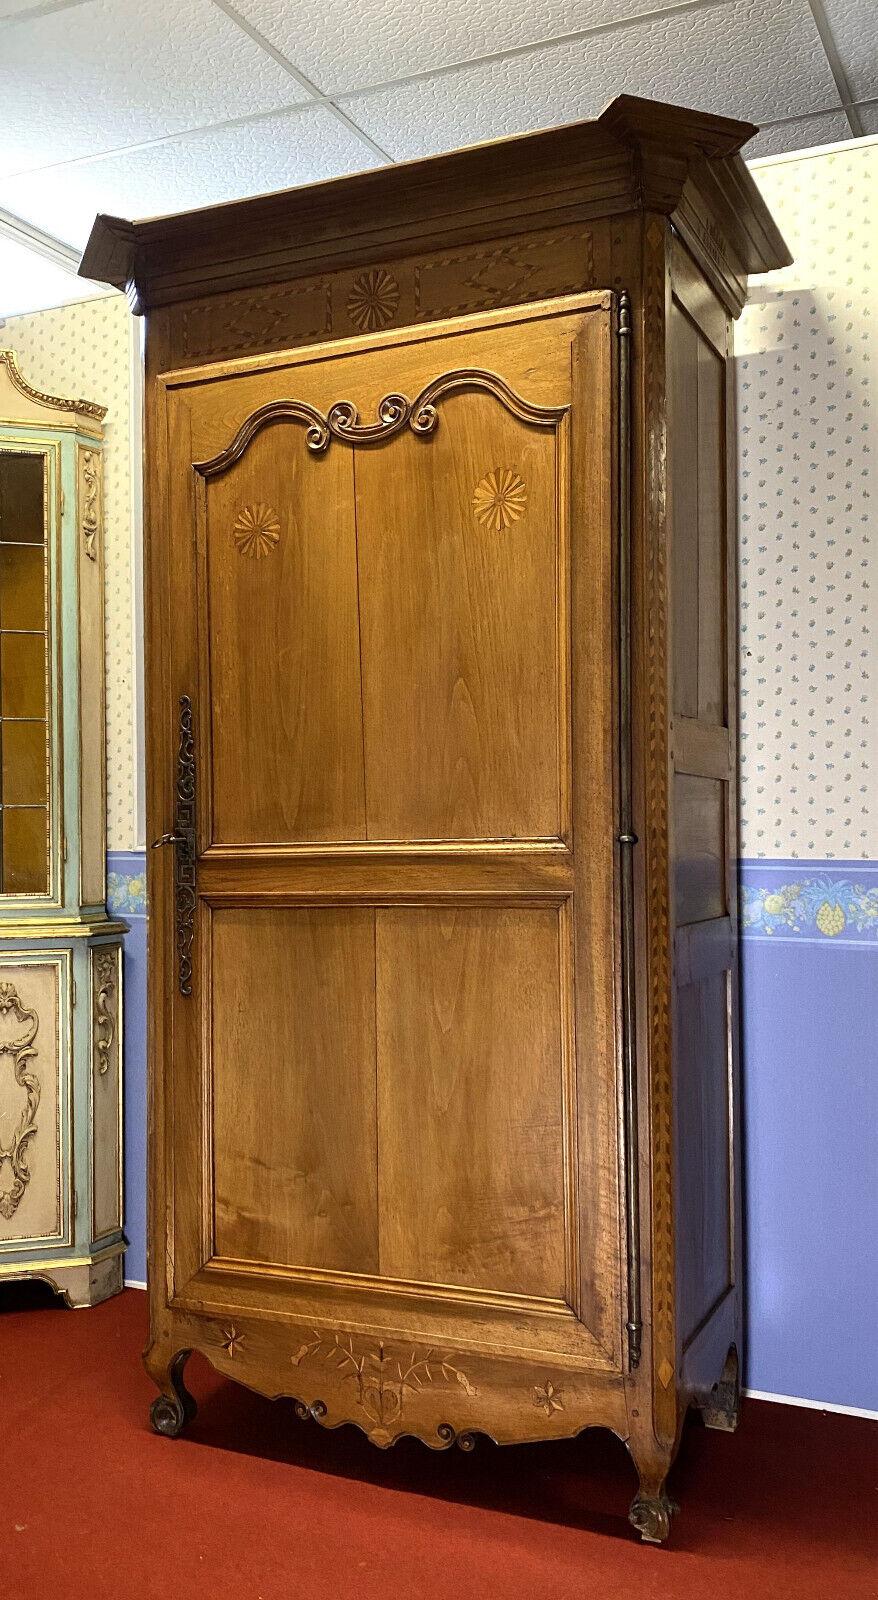 Elevate your living space with this stunning Louis XV walnut marquetry wardrobe, dating back to around 1750. Its elegant design and exquisite marquetry work exemplify the grandeur of the Louis XV era, adding a touch of timeless sophistication to any